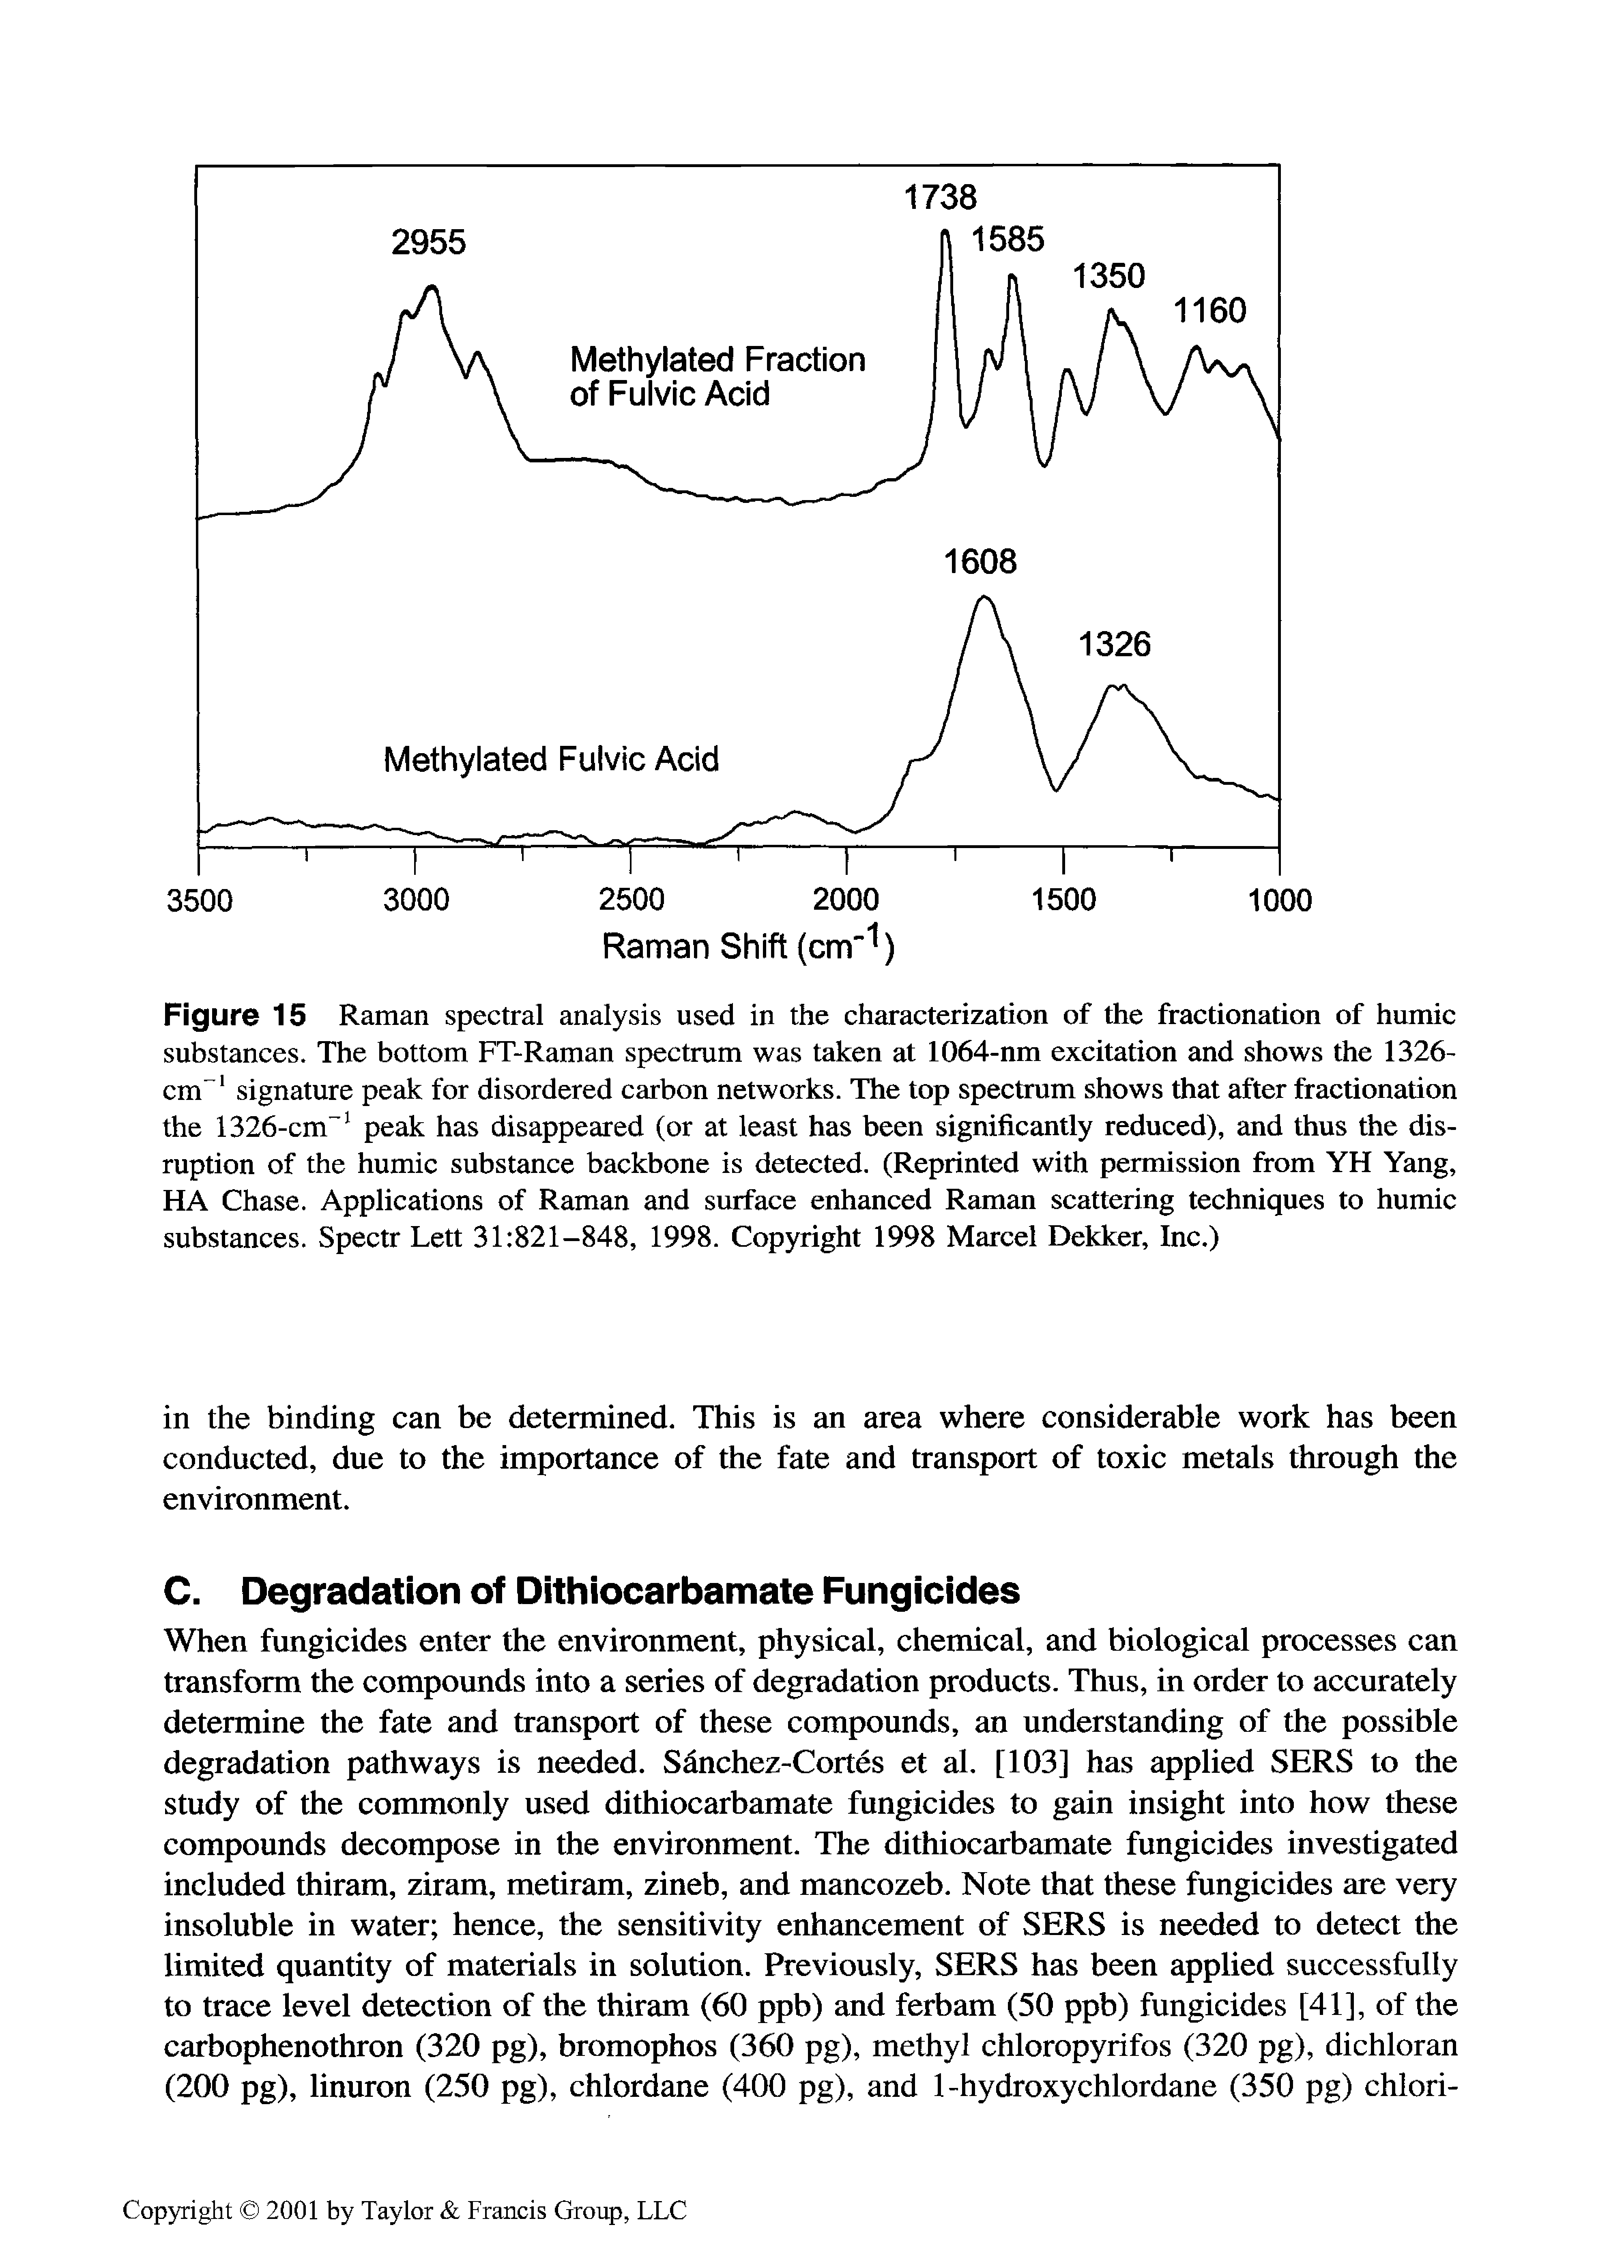 Figure 15 Raman spectral analysis used in the characterization of the fractionation of humic substances. The bottom FT-Raman spectrum was taken at 1064-nm excitation and shows the 1326-cm" signature peak for disordered carbon networks. The top spectrum shows that after fractionation the 1326-cm peak has disappeared (or at least has been significantly reduced), and thus the disruption of the humic substance backbone is detected. (Reprinted with permission from YH Yang, HA Chase. Applications of Raman and surface enhanced Raman scattering techniques to humic substances. Spectr Lett 31 821-848, 1998. Copyright 1998 Marcel Dekker, Inc.)...